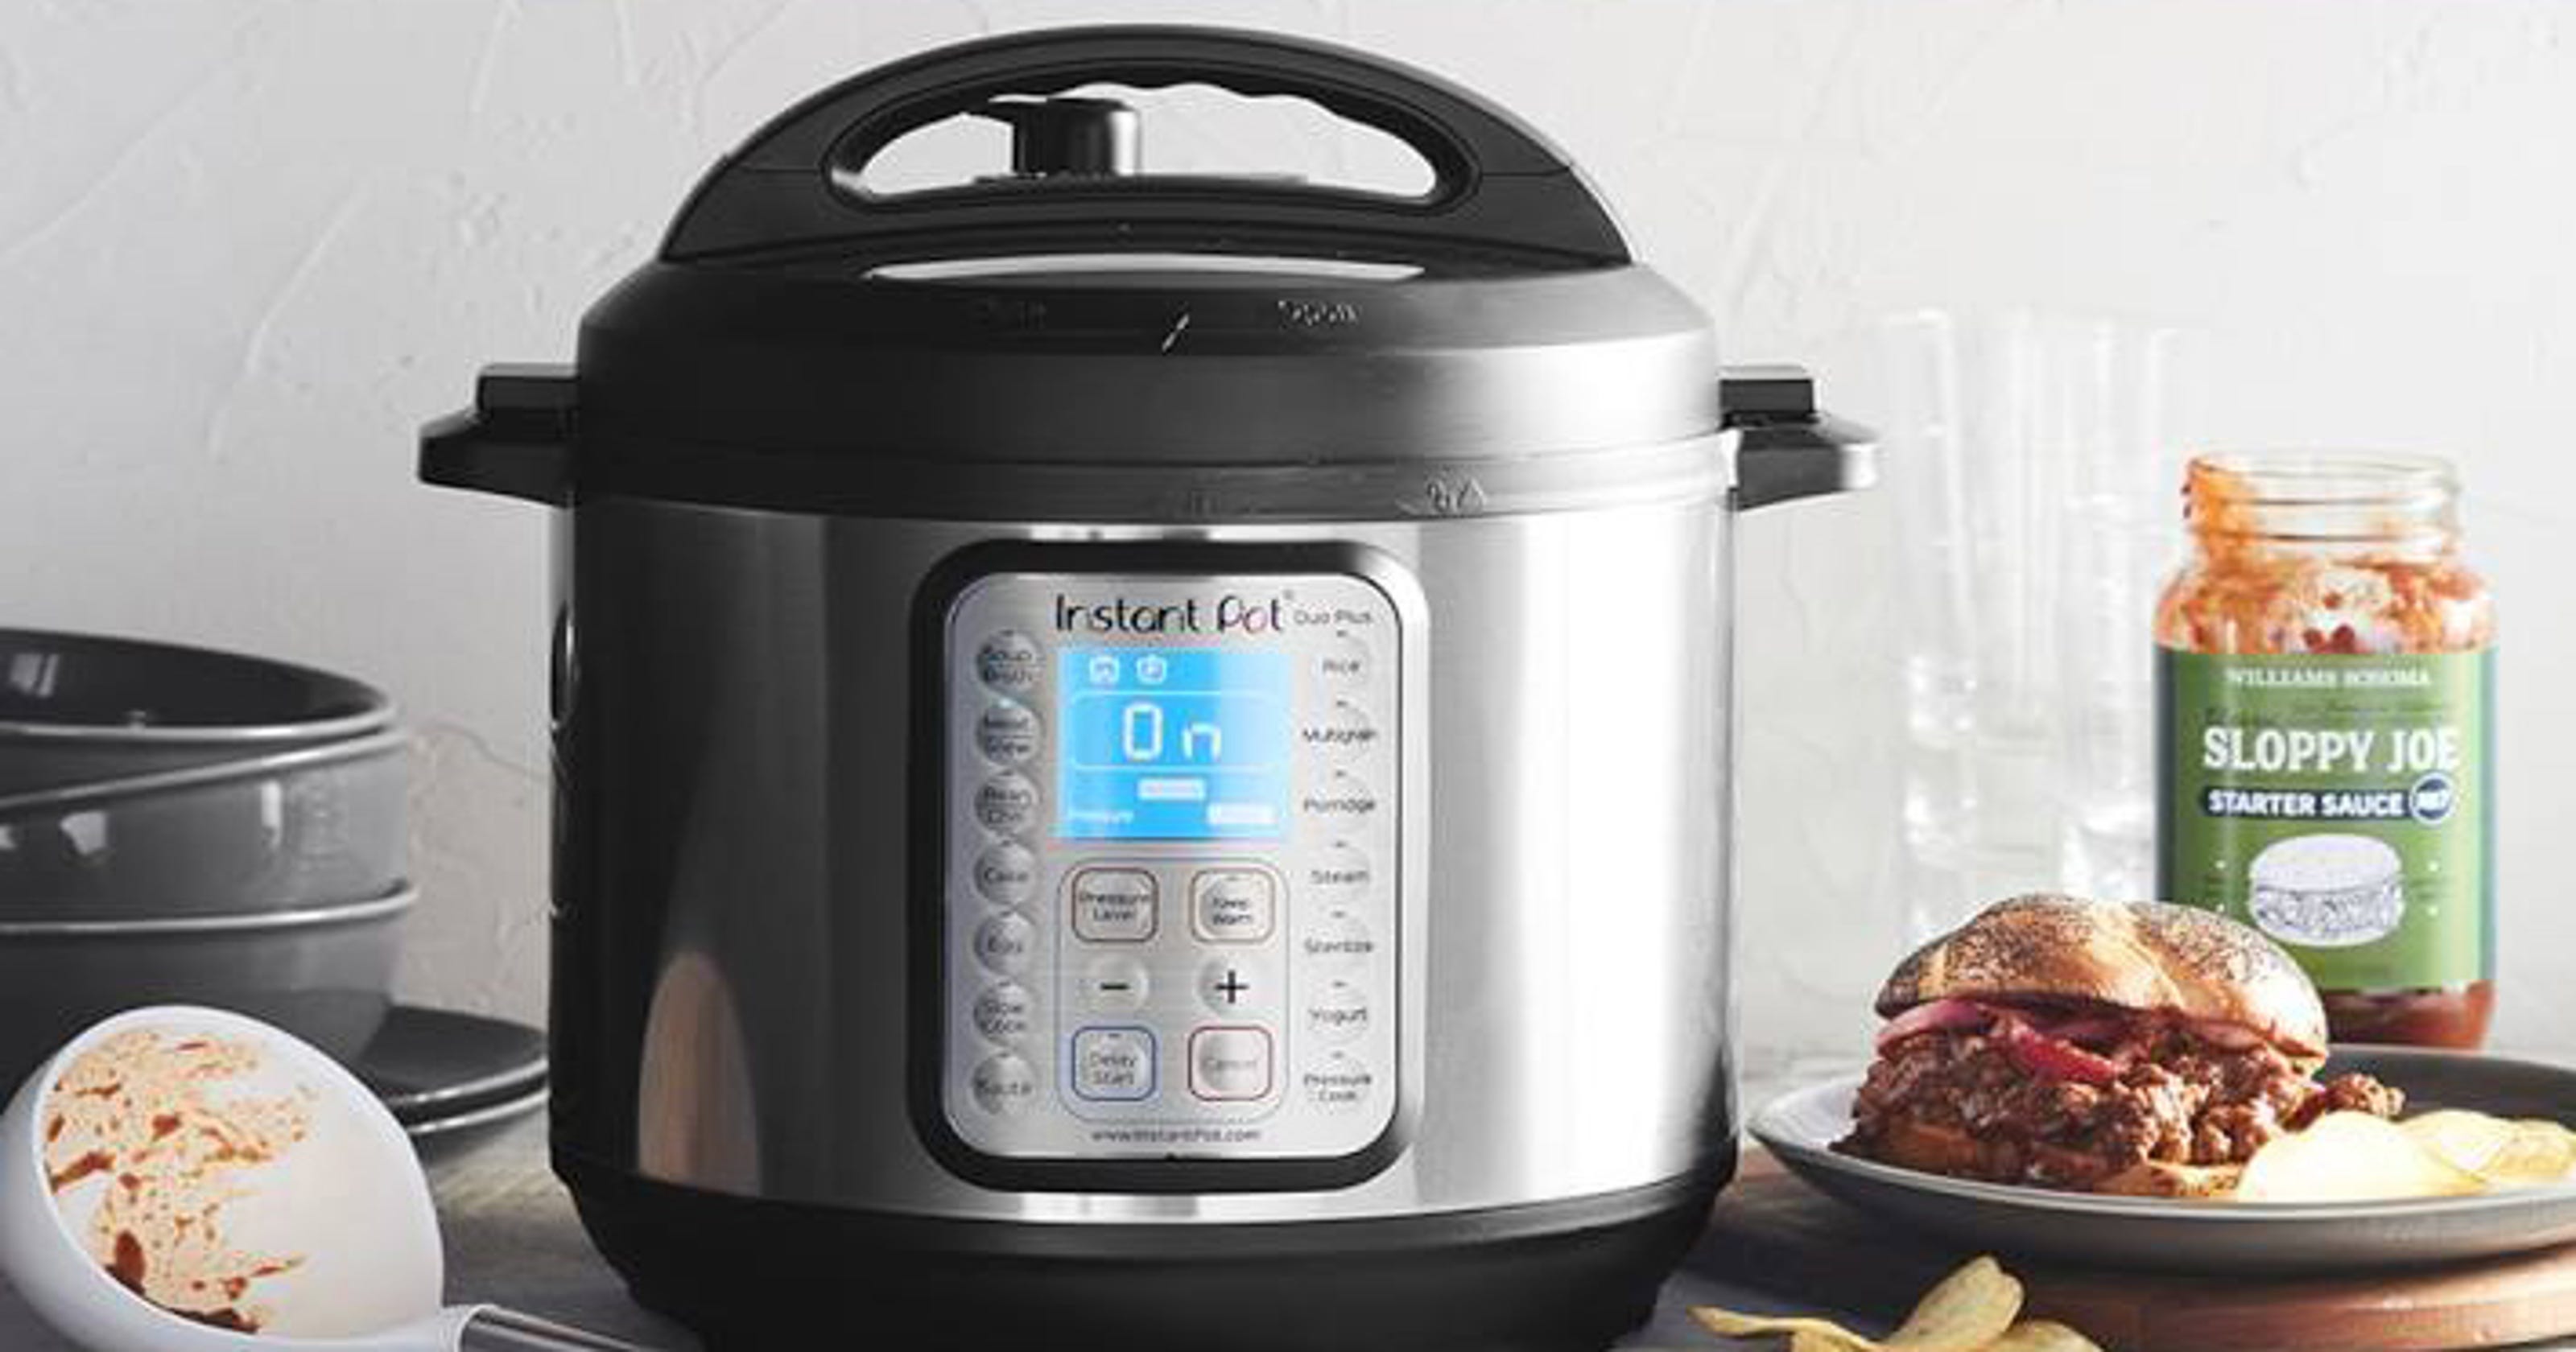 The Instant Pot DUO Plus 60 9-in-1 is on sale early for Prime Day